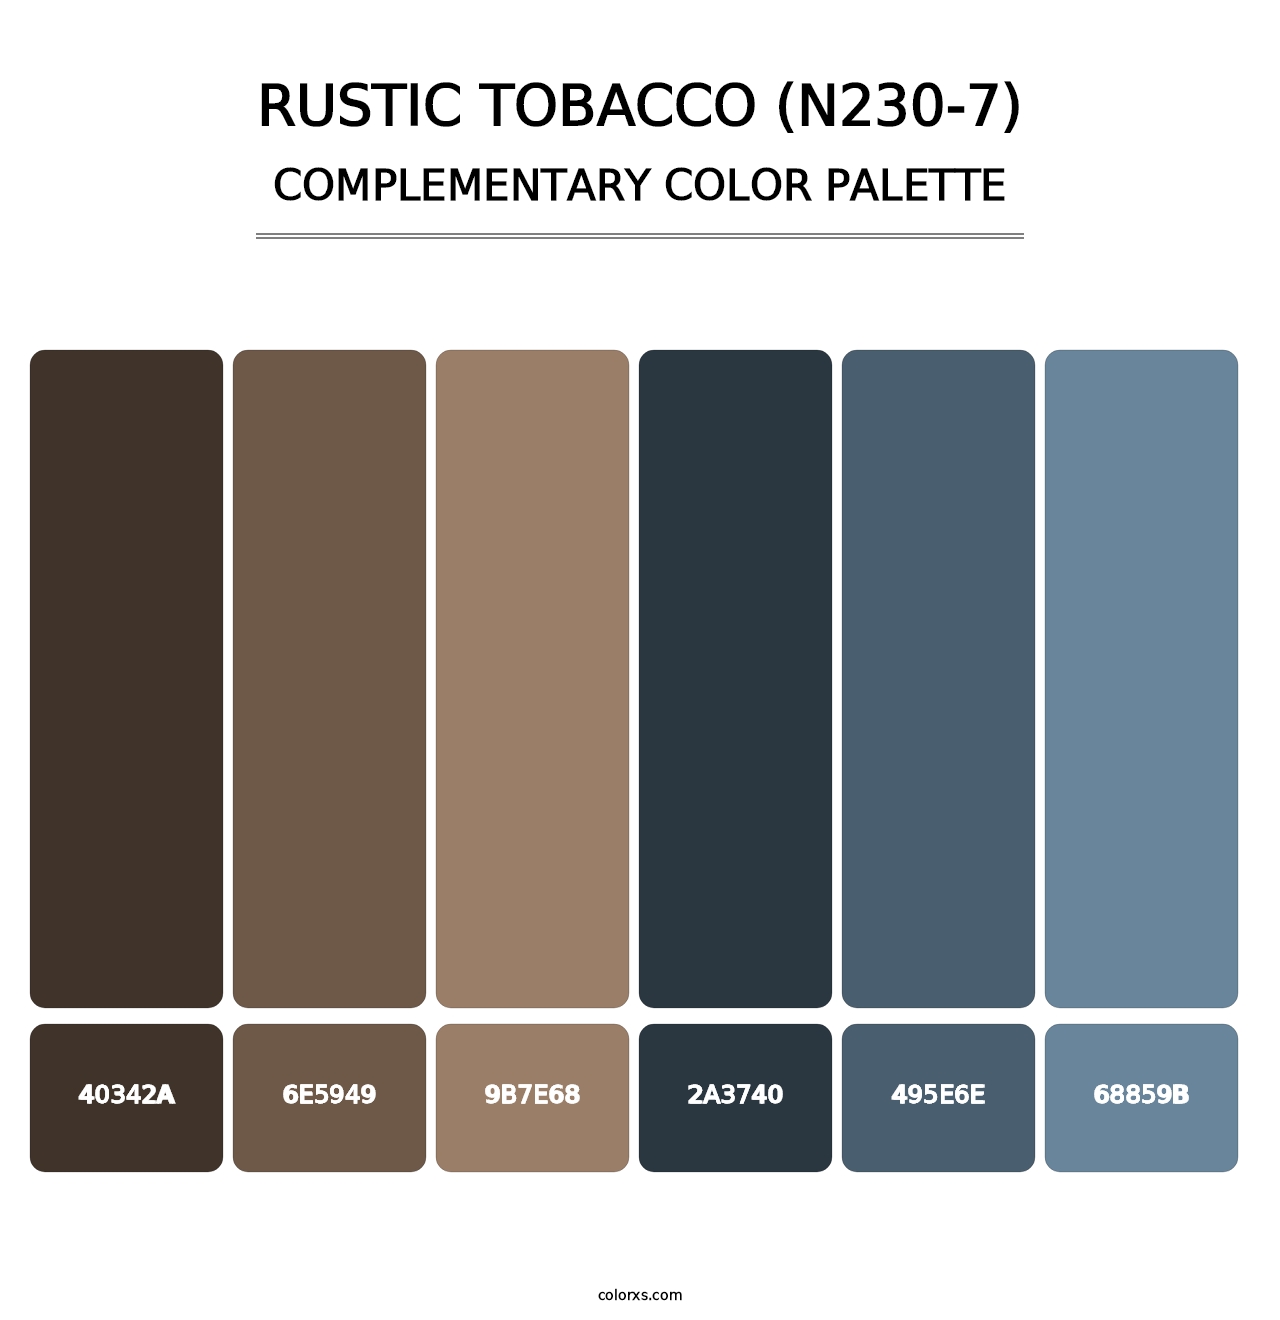 Rustic Tobacco (N230-7) - Complementary Color Palette